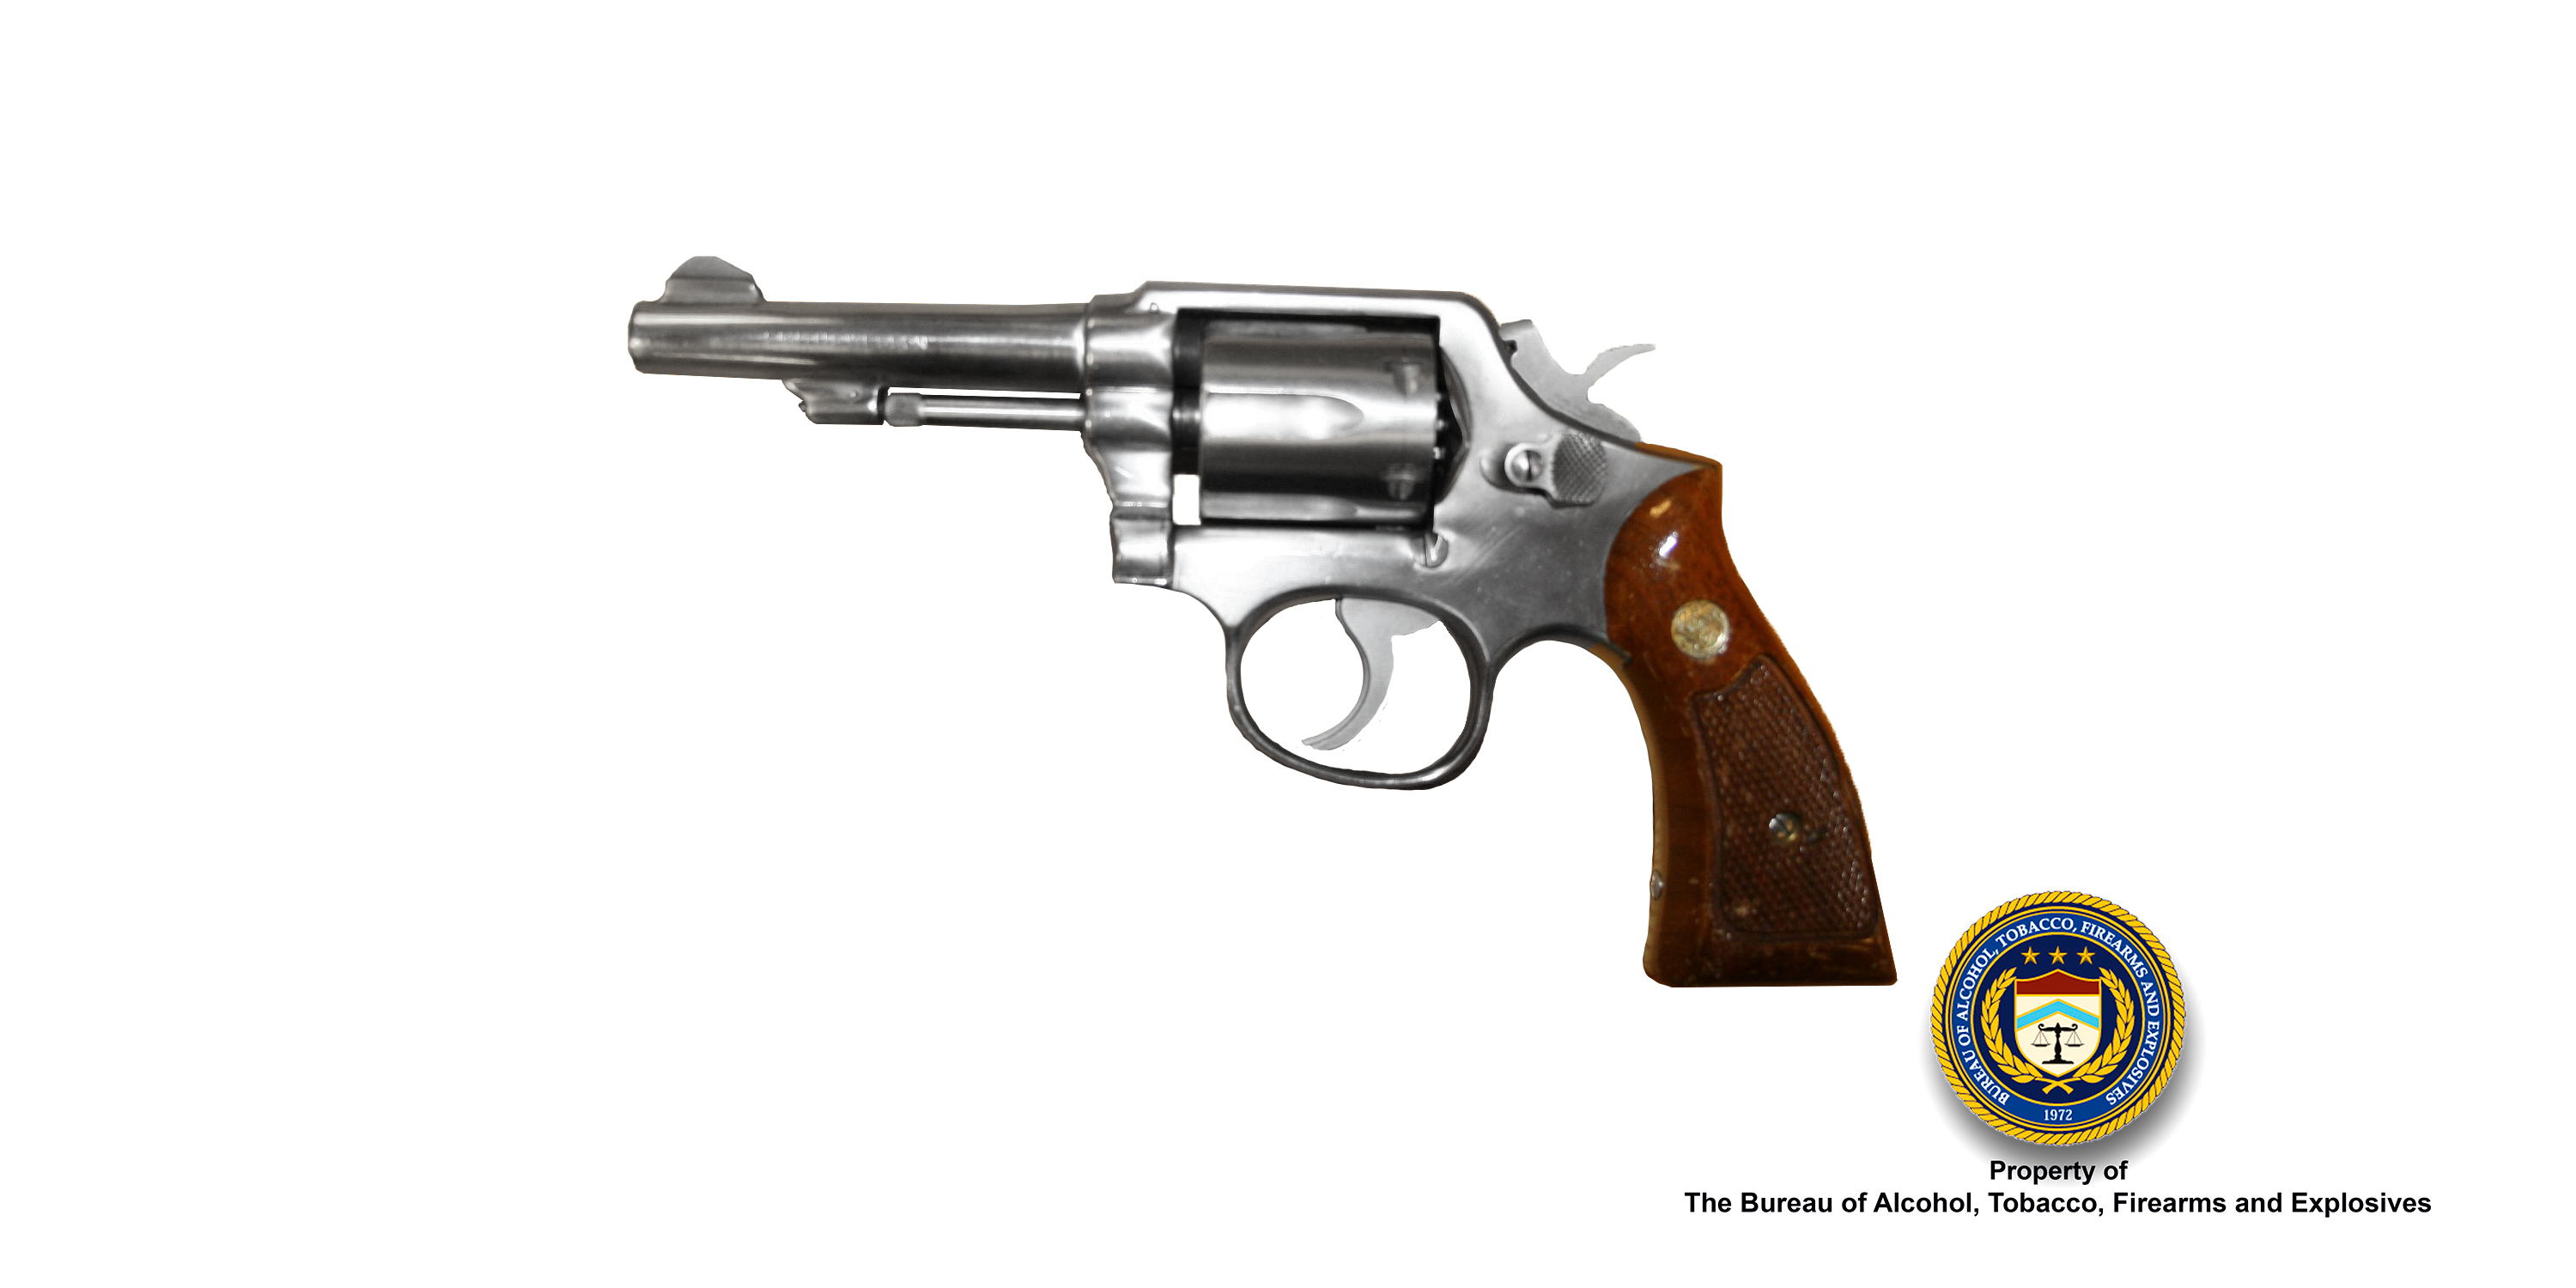 An image of a Smith and Wesson Model 64 Revolver